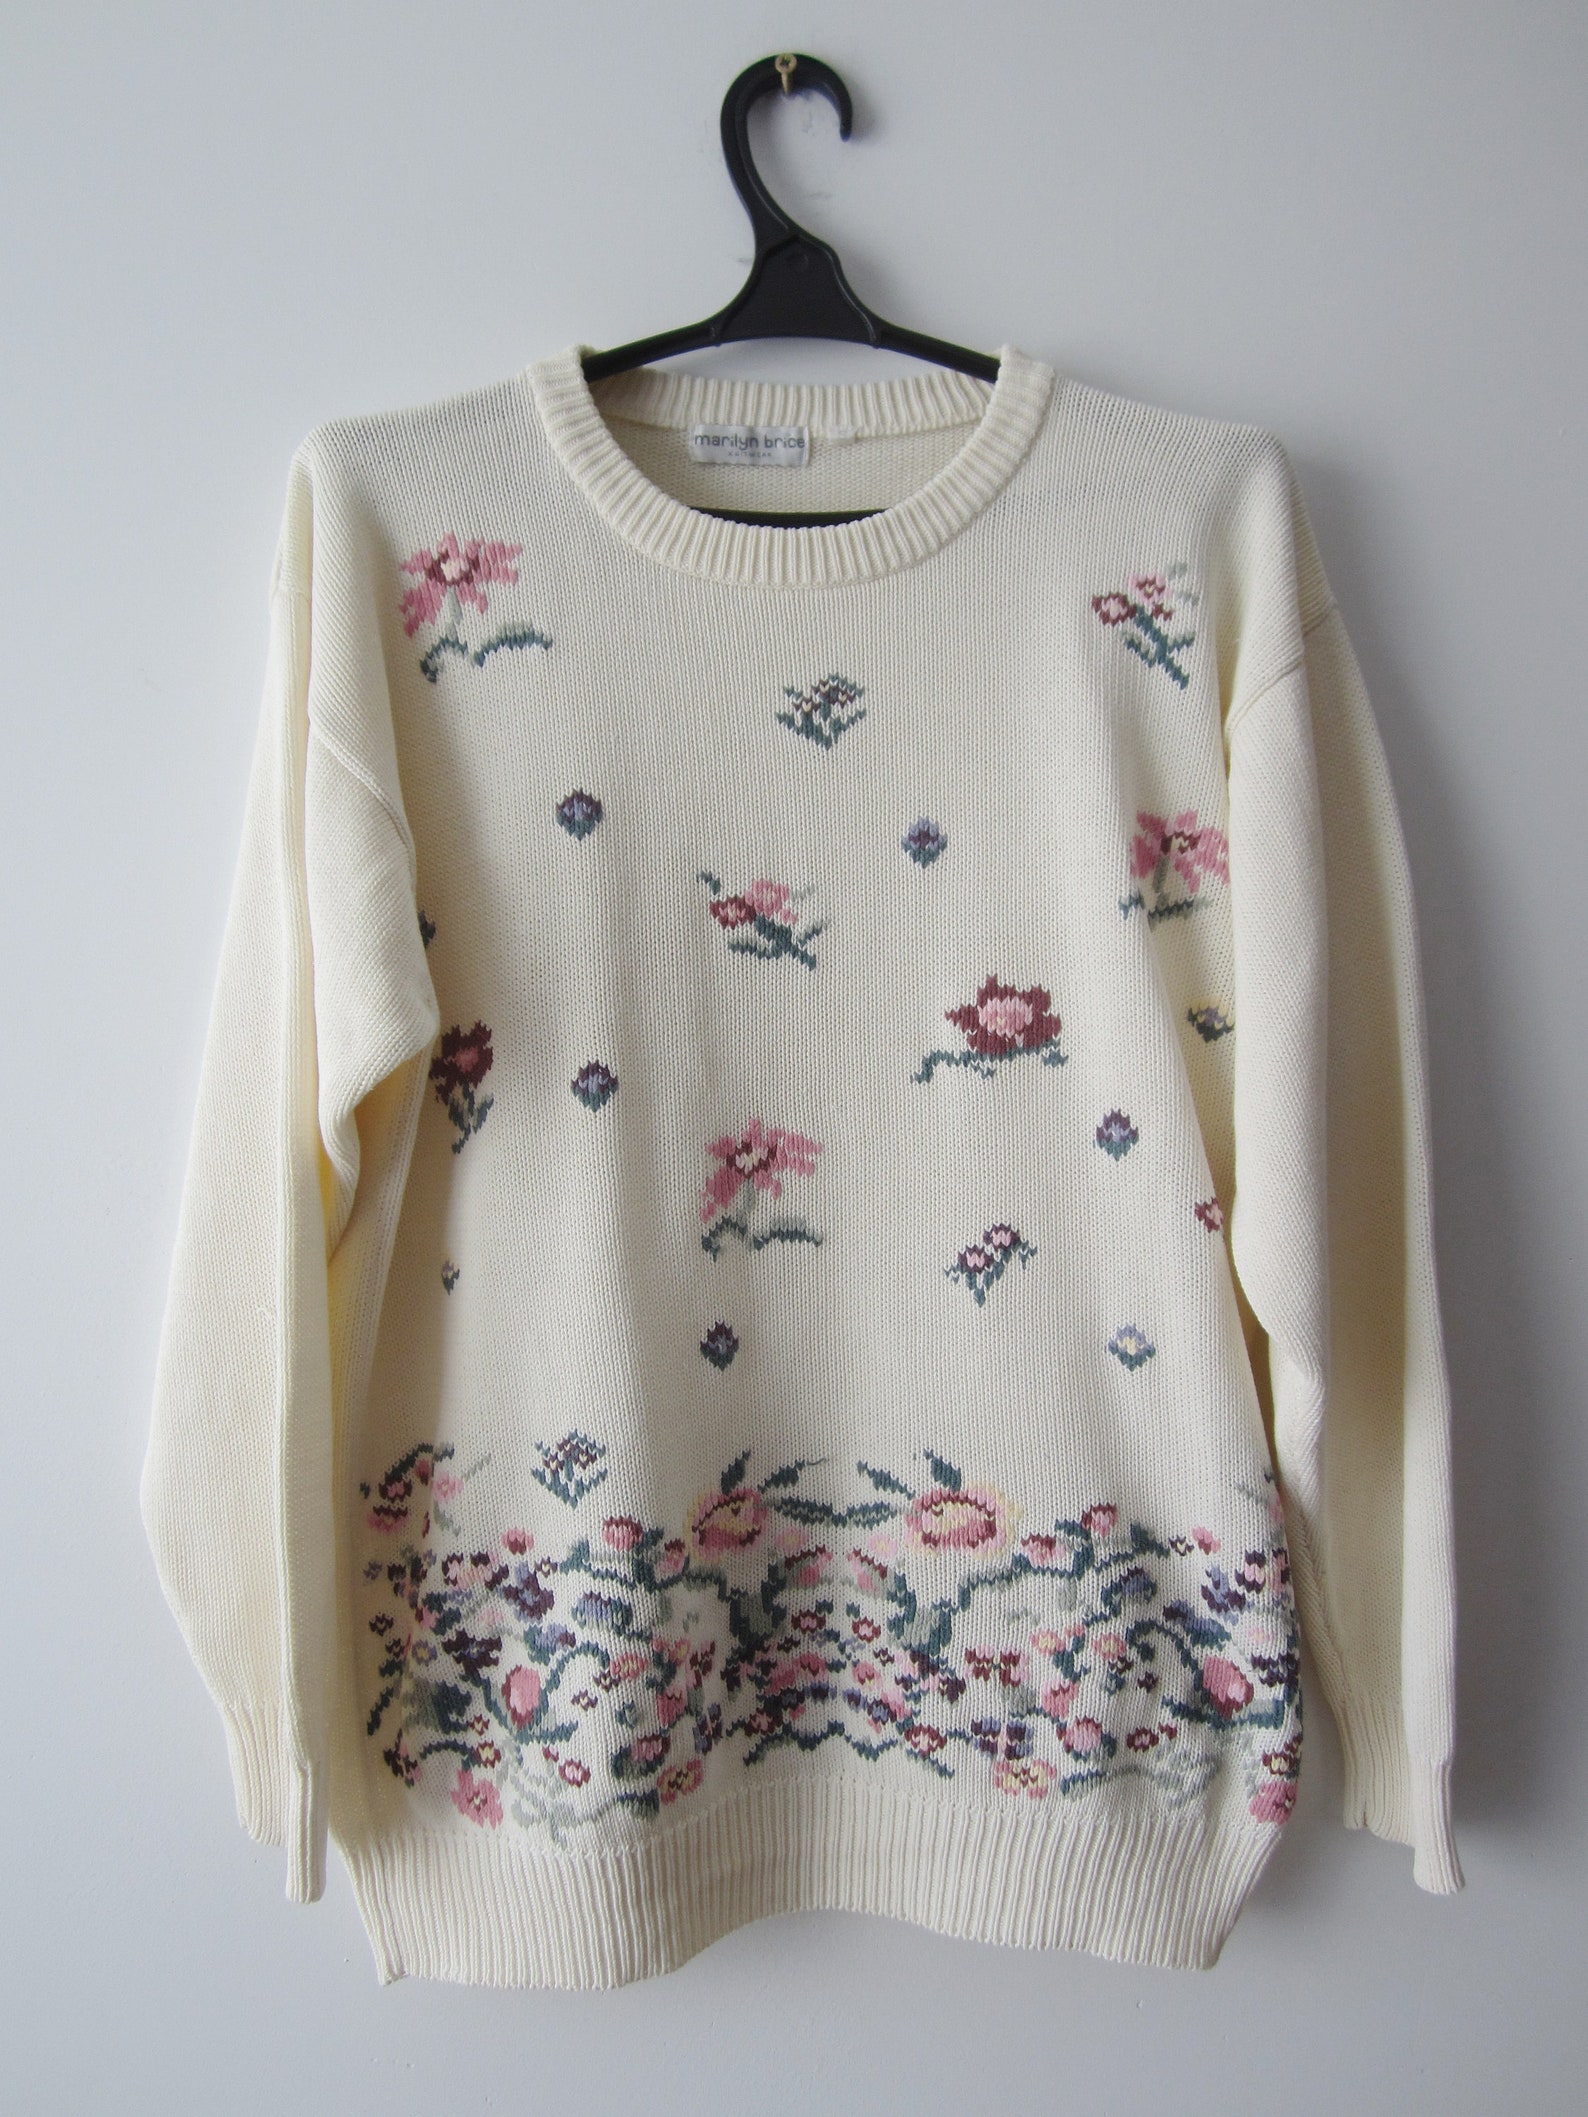 Vintage Embroidered Floral Sweater 80s-90s Cotton Knitted - Etsy